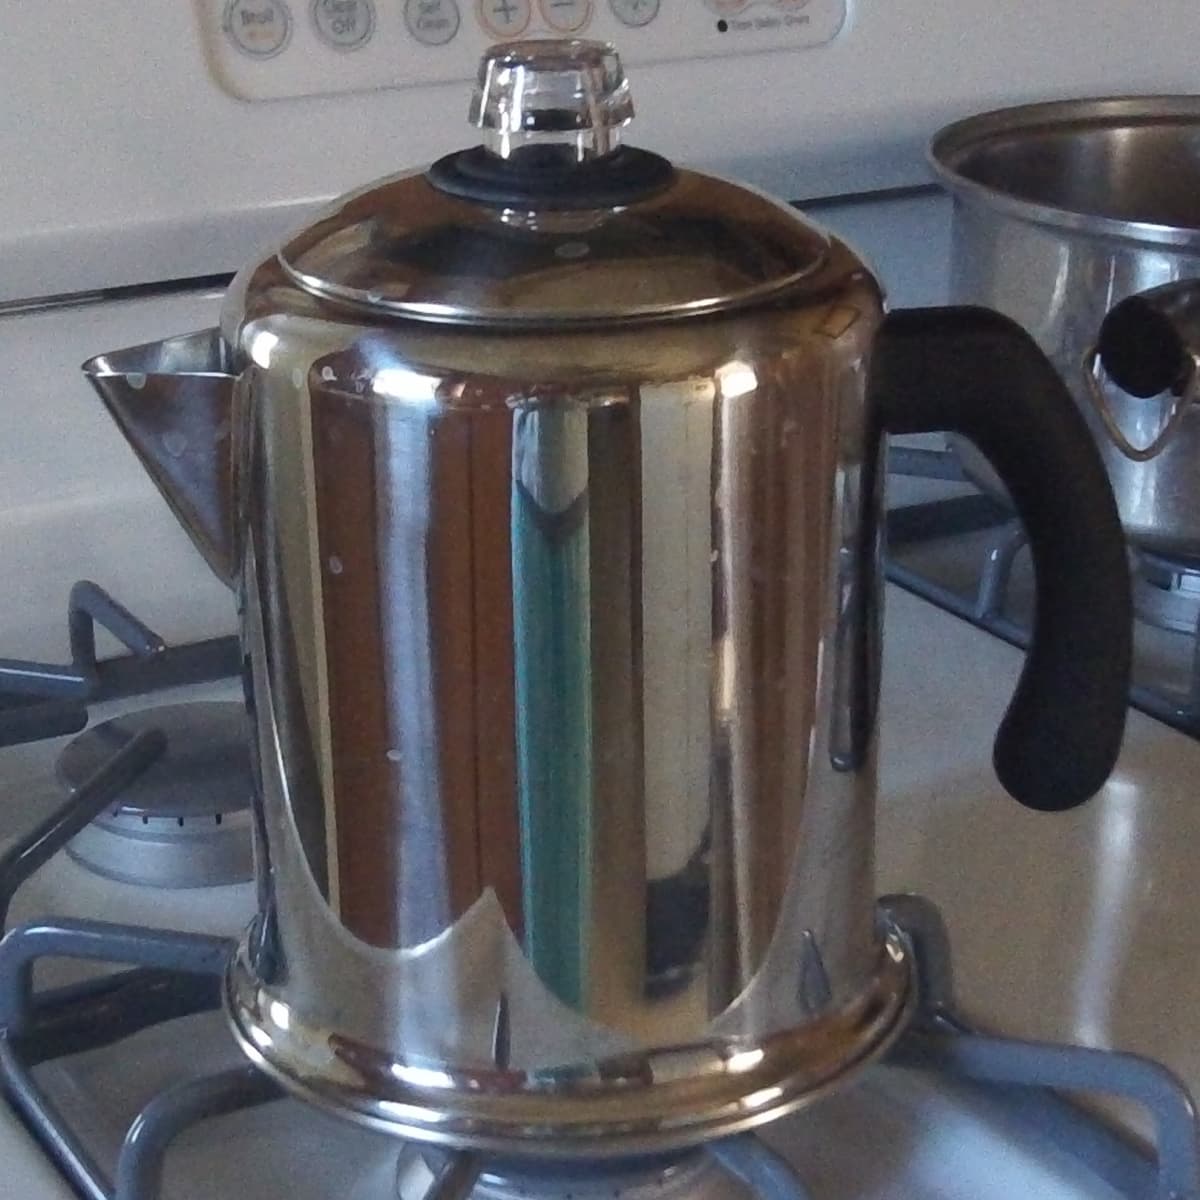 Coffee Maker Percolator Stove Top Pot - The Dragonfly Boutique